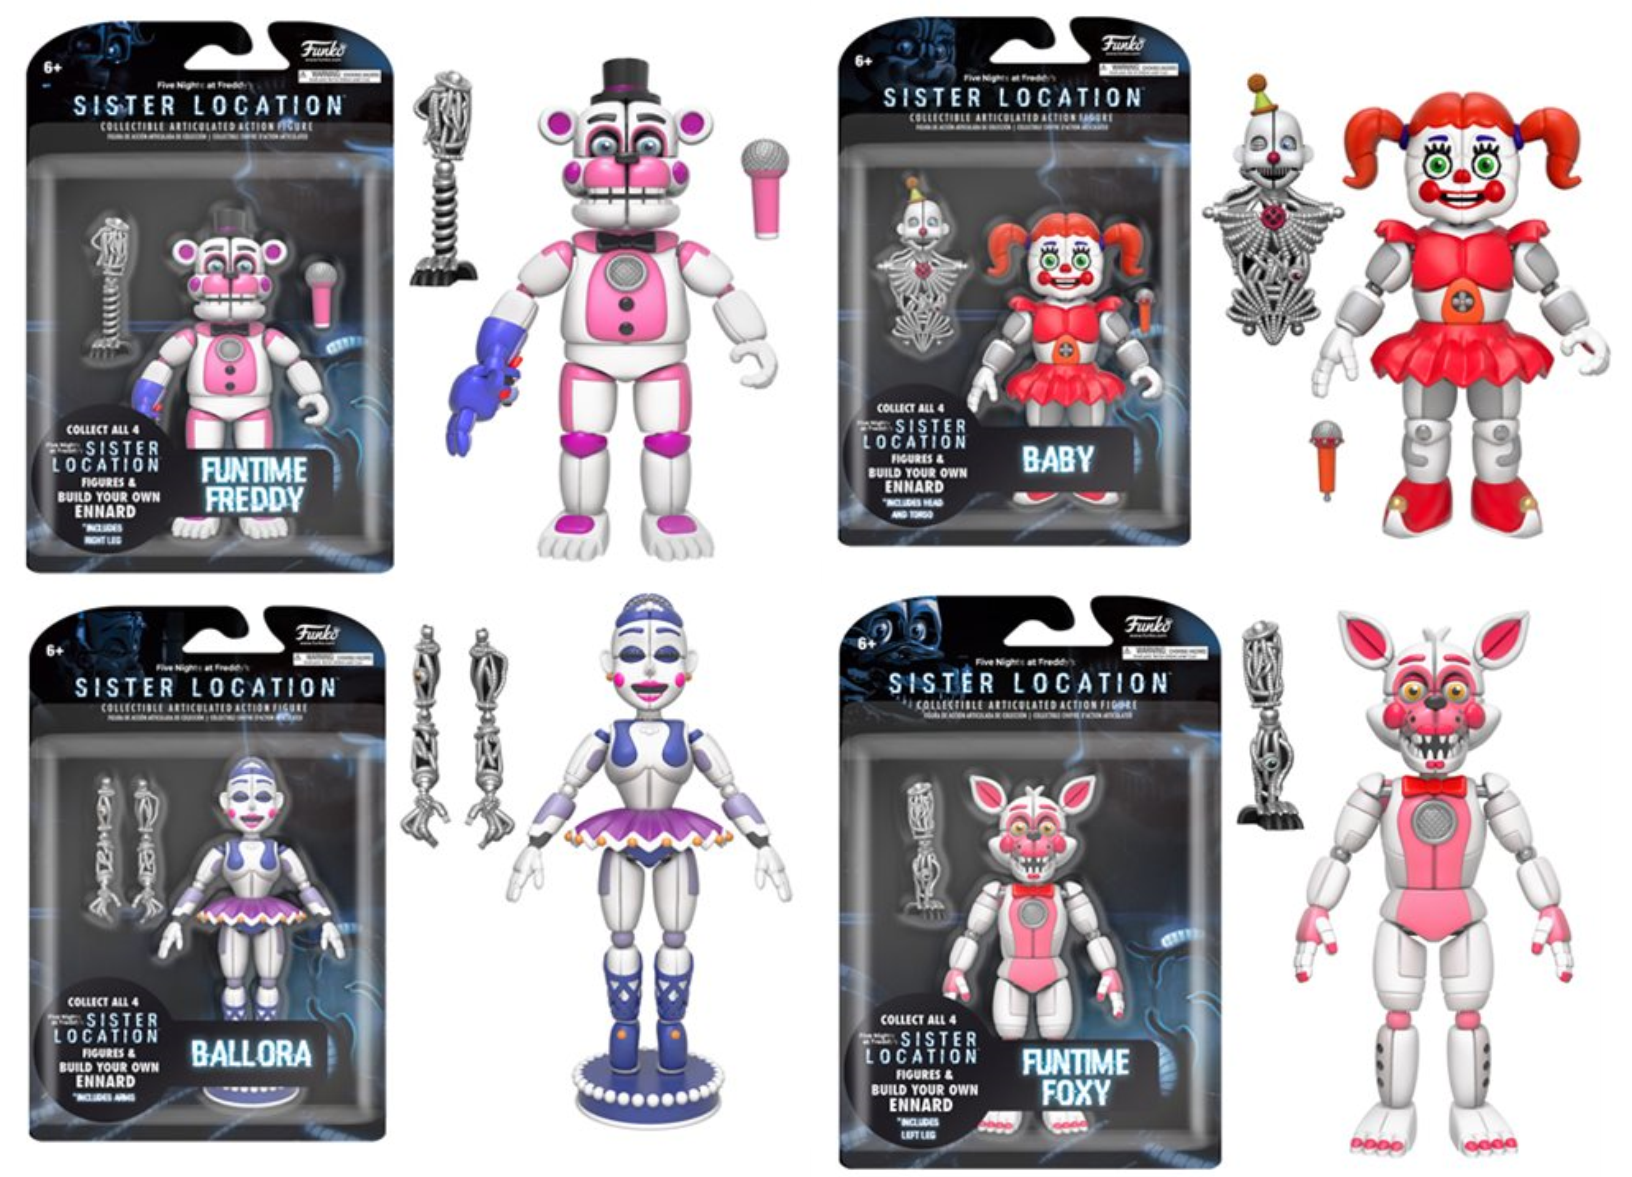 five nights at freddy's action figure set